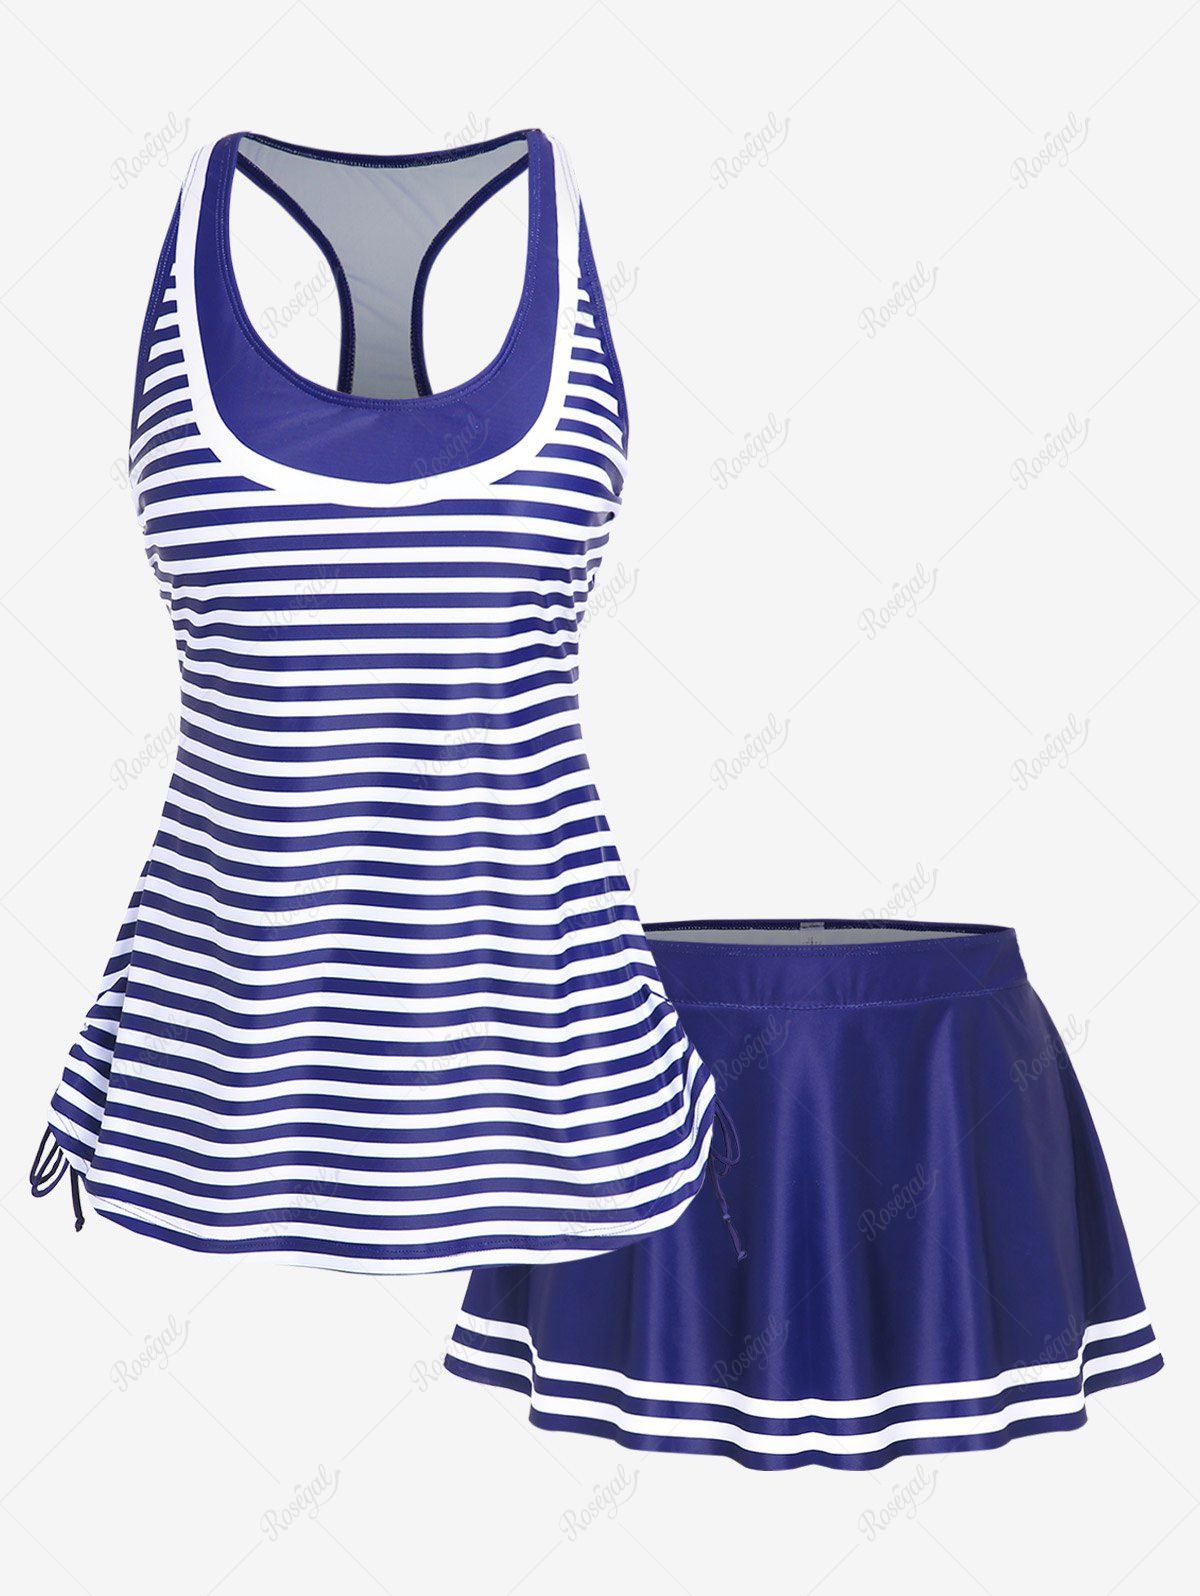 Buy Plus Size Racerback Stripes Cinched Ruched Padded Skort Tankini Swimsuit  